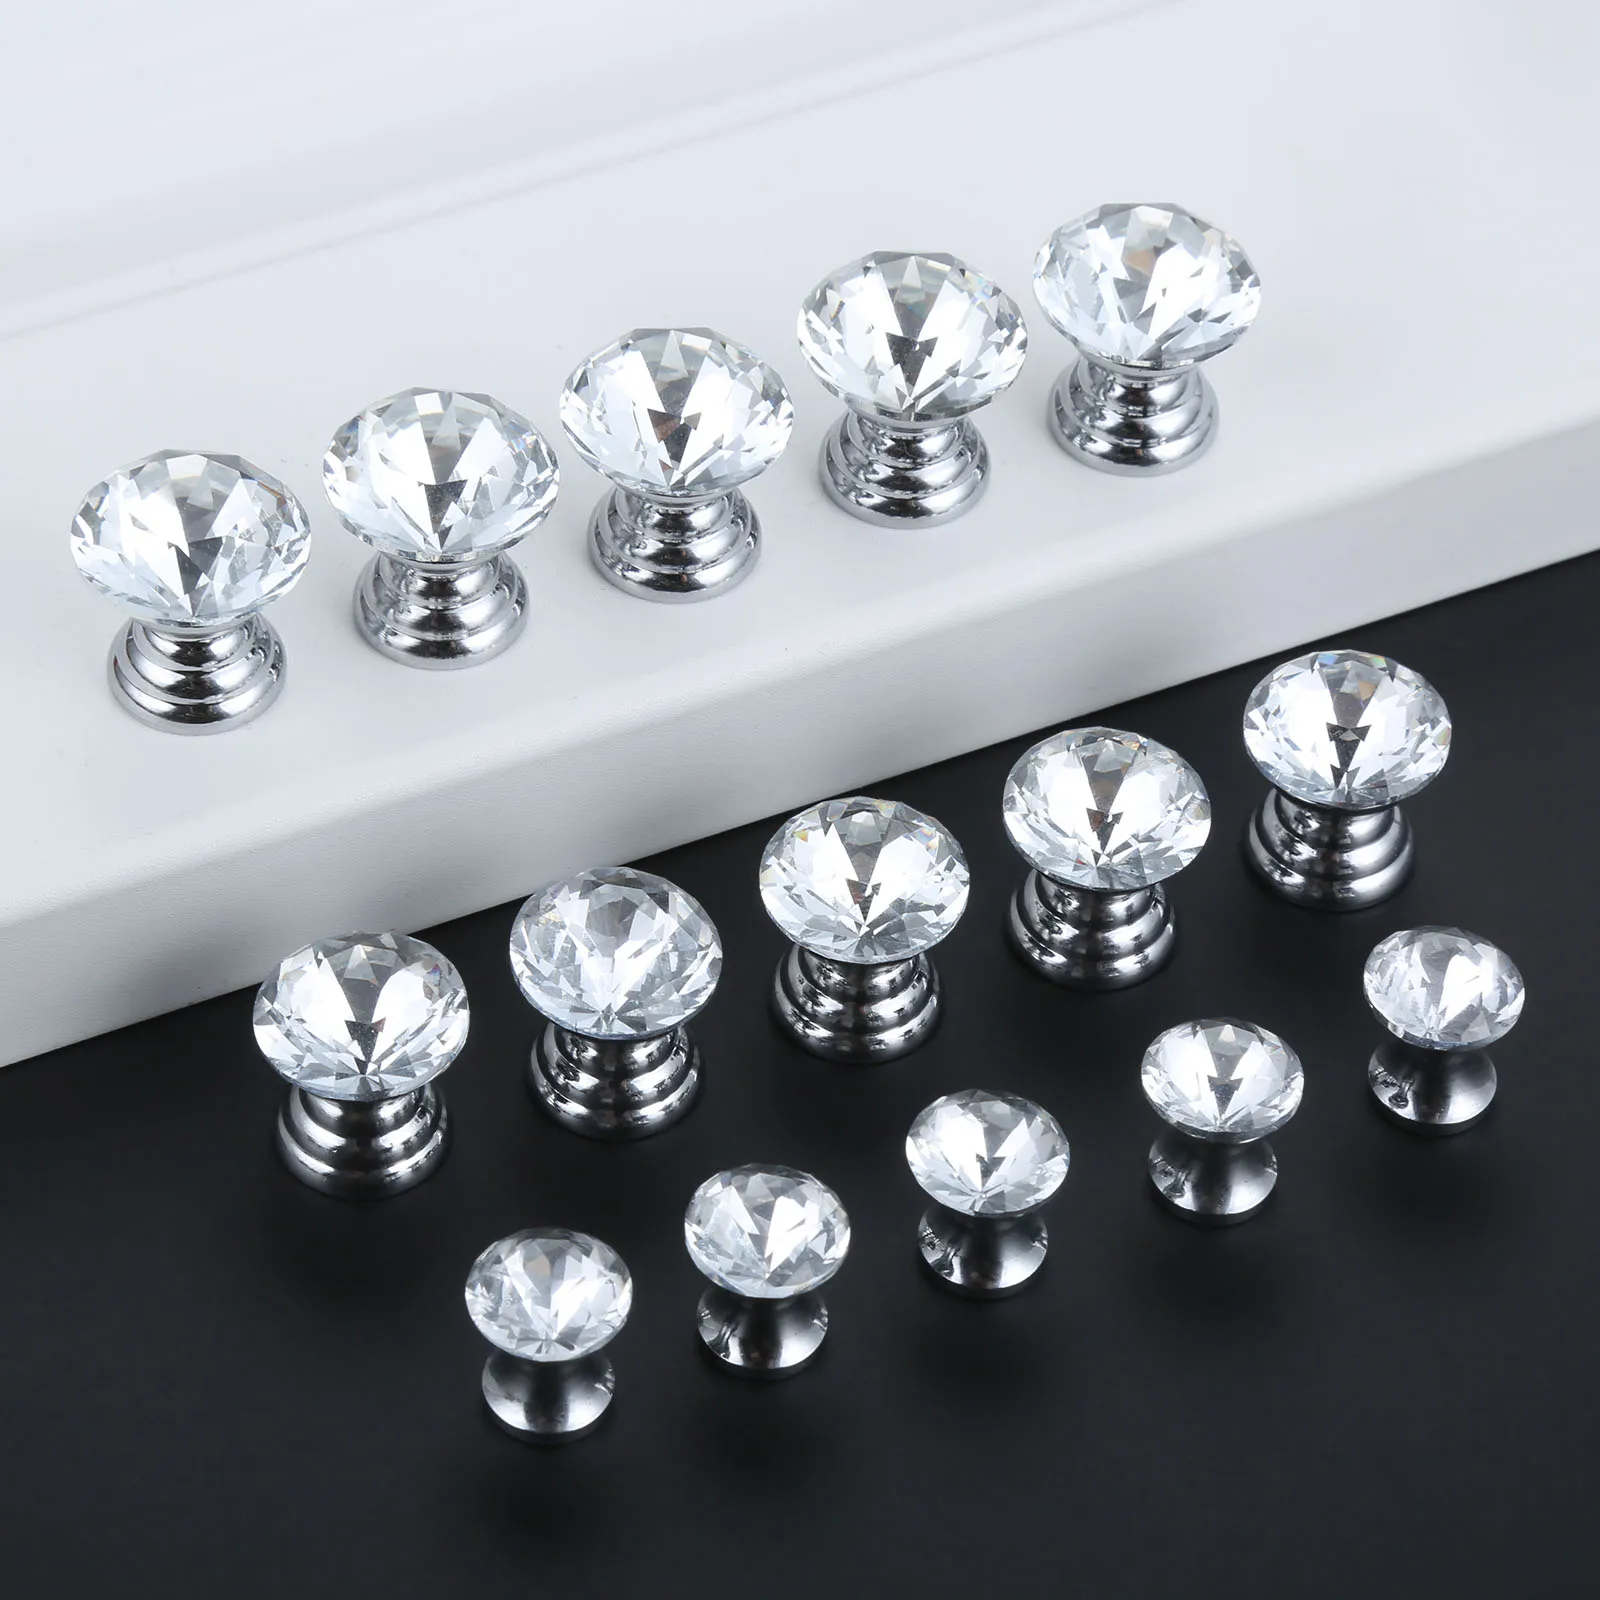 

12mm 16mm 18mm Clear Crystal Jewelry Gift Box Drawer Knob Furniture Hardware Cupboard Handle Door Pulls Knobs